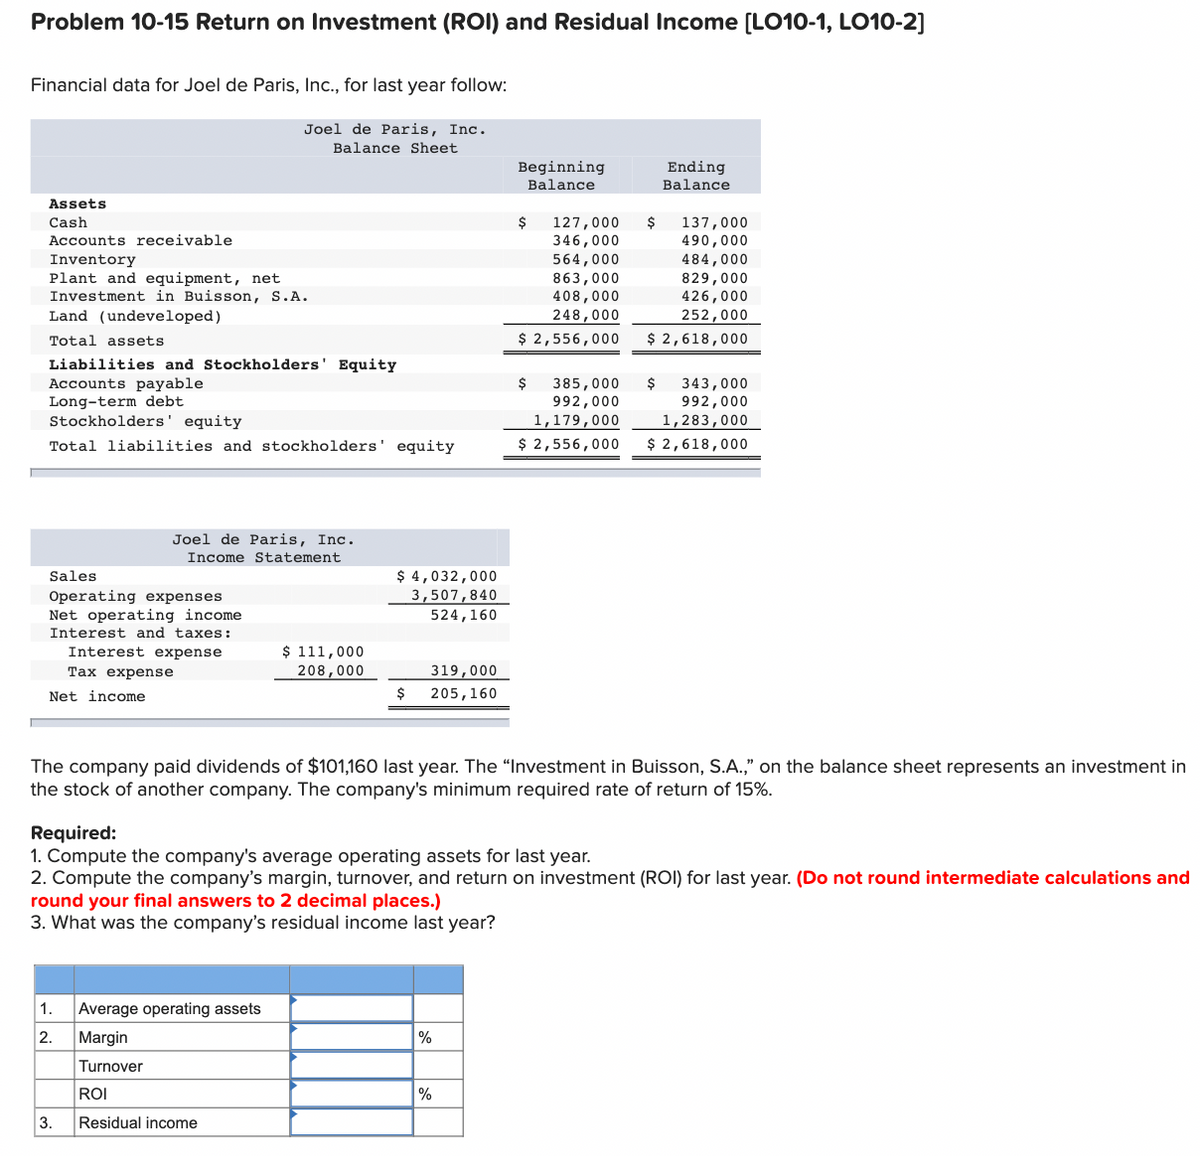 Problem 10-15 Return on Investment (ROI) and Residual Income [LO10-1, LO10-2]
Financial data for Joel de Paris, Inc., for last year follow:
Joel de Paris, Inc.
Balance Sheet
Assets
Cash
Accounts receivable
Inventory
Plant and equipment, net
Investment in Buisson, S.A.
Land (undeveloped)
Total assets
Liabilities and Stockholders' Equity
Accounts payable
Long-term debt
Stockholders' equity
Total liabilities and stockholders' equity
Sales
Operating expenses
Net operating income
Interest and taxes:
Interest expense
Tax expense
Net income
Joel de Paris, Inc.
Income Statement
1.
2.
3.
$ 111,000
208,000
$ 4,032,000
3,507,840
524,160
Average operating assets
Margin
Turnover
ROI
Residual income
319,000
$ 205,160
Beginning
Balance
%
$
%
127,000 $
346,000
564,000
863,000
408,000
248,000
$ 2,556,000
The company paid dividends of $101,160 last year. The "Investment in Buisson, S.A.," on the balance sheet represents an investment in
the stock of another company. The company's minimum required rate of return of 15%.
$
Required:
1. Compute the company's average operating assets for last year.
2. Compute the company's margin, turnover, and return on investment (ROI) for last year. (Do not round intermediate calculations and
round your final answers to 2 decimal places.)
3. What was the company's residual income last year?
Ending
Balance
137,000
490,000
484,000
829,000
426,000
252,000
$ 2,618,000
385,000 $ 343,000
992,000
1,179,000
992,000
1,283,000
$ 2,556,000
$ 2,618,000